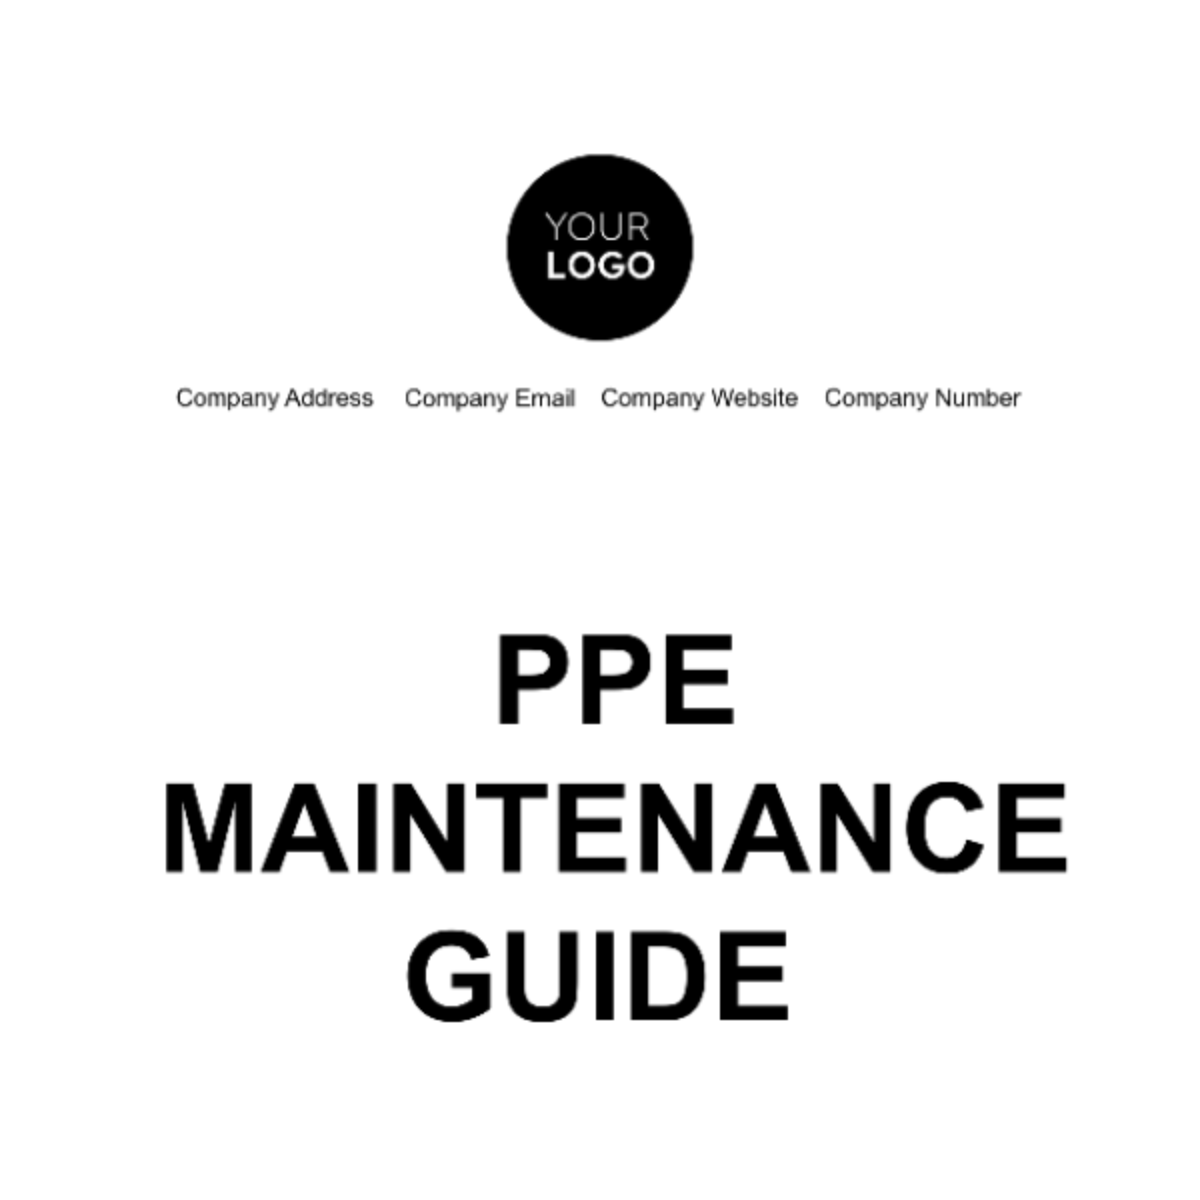 PPE Maintenance Guide Template